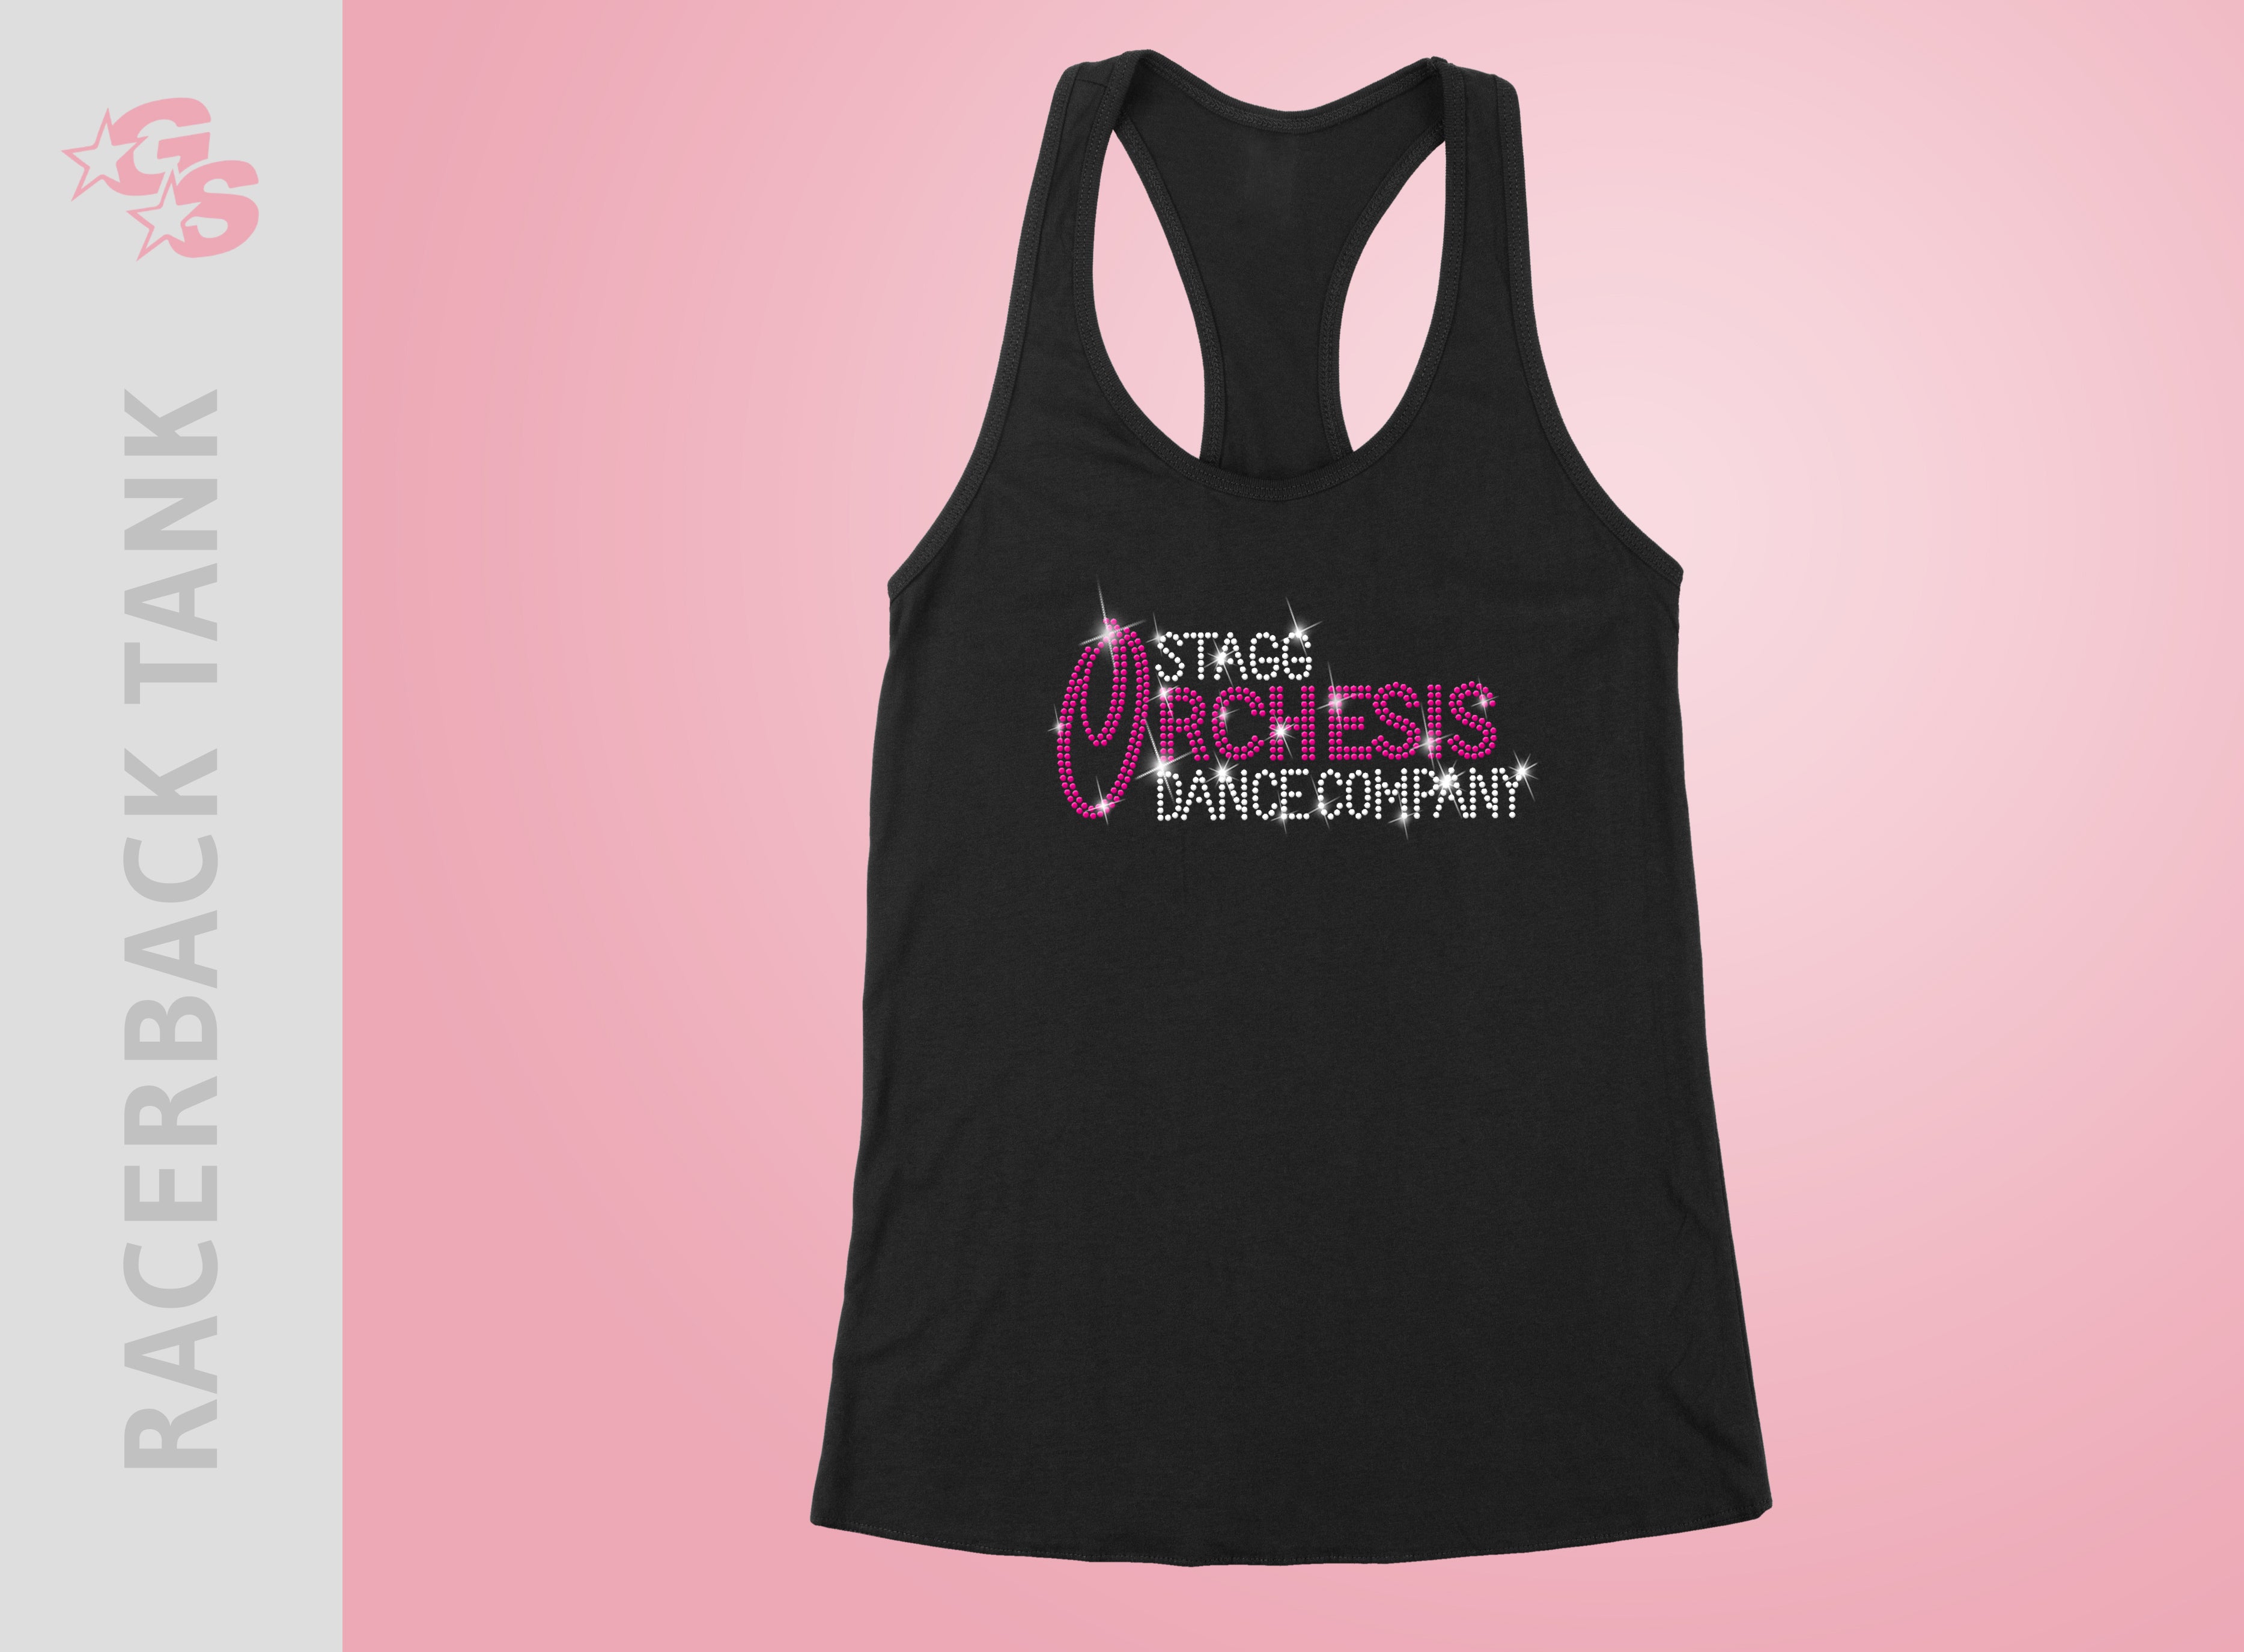 Stagg Orchesis Dance Company Racerback Tank